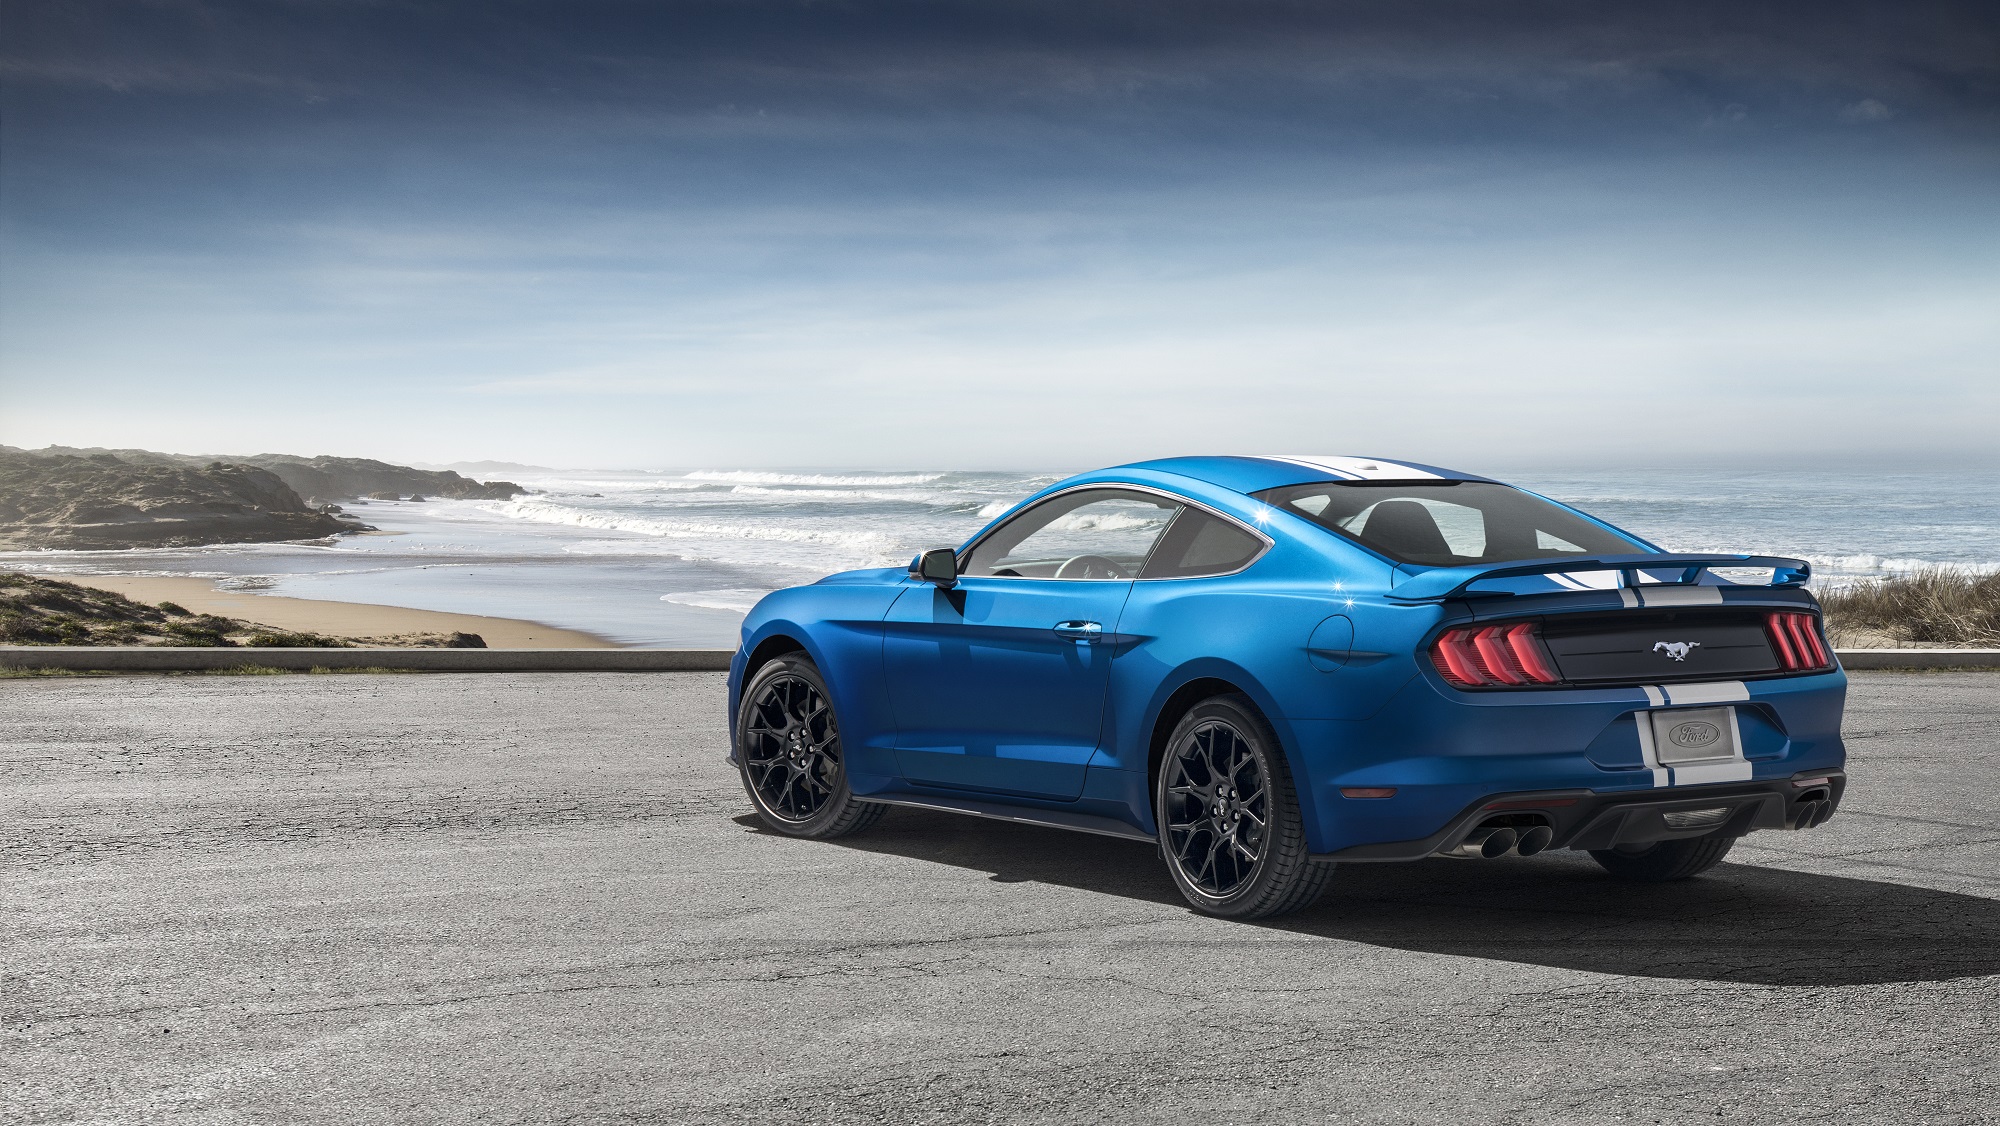 The Ford Mustang EcoBoost, like this blue example, gets commendable mpg.